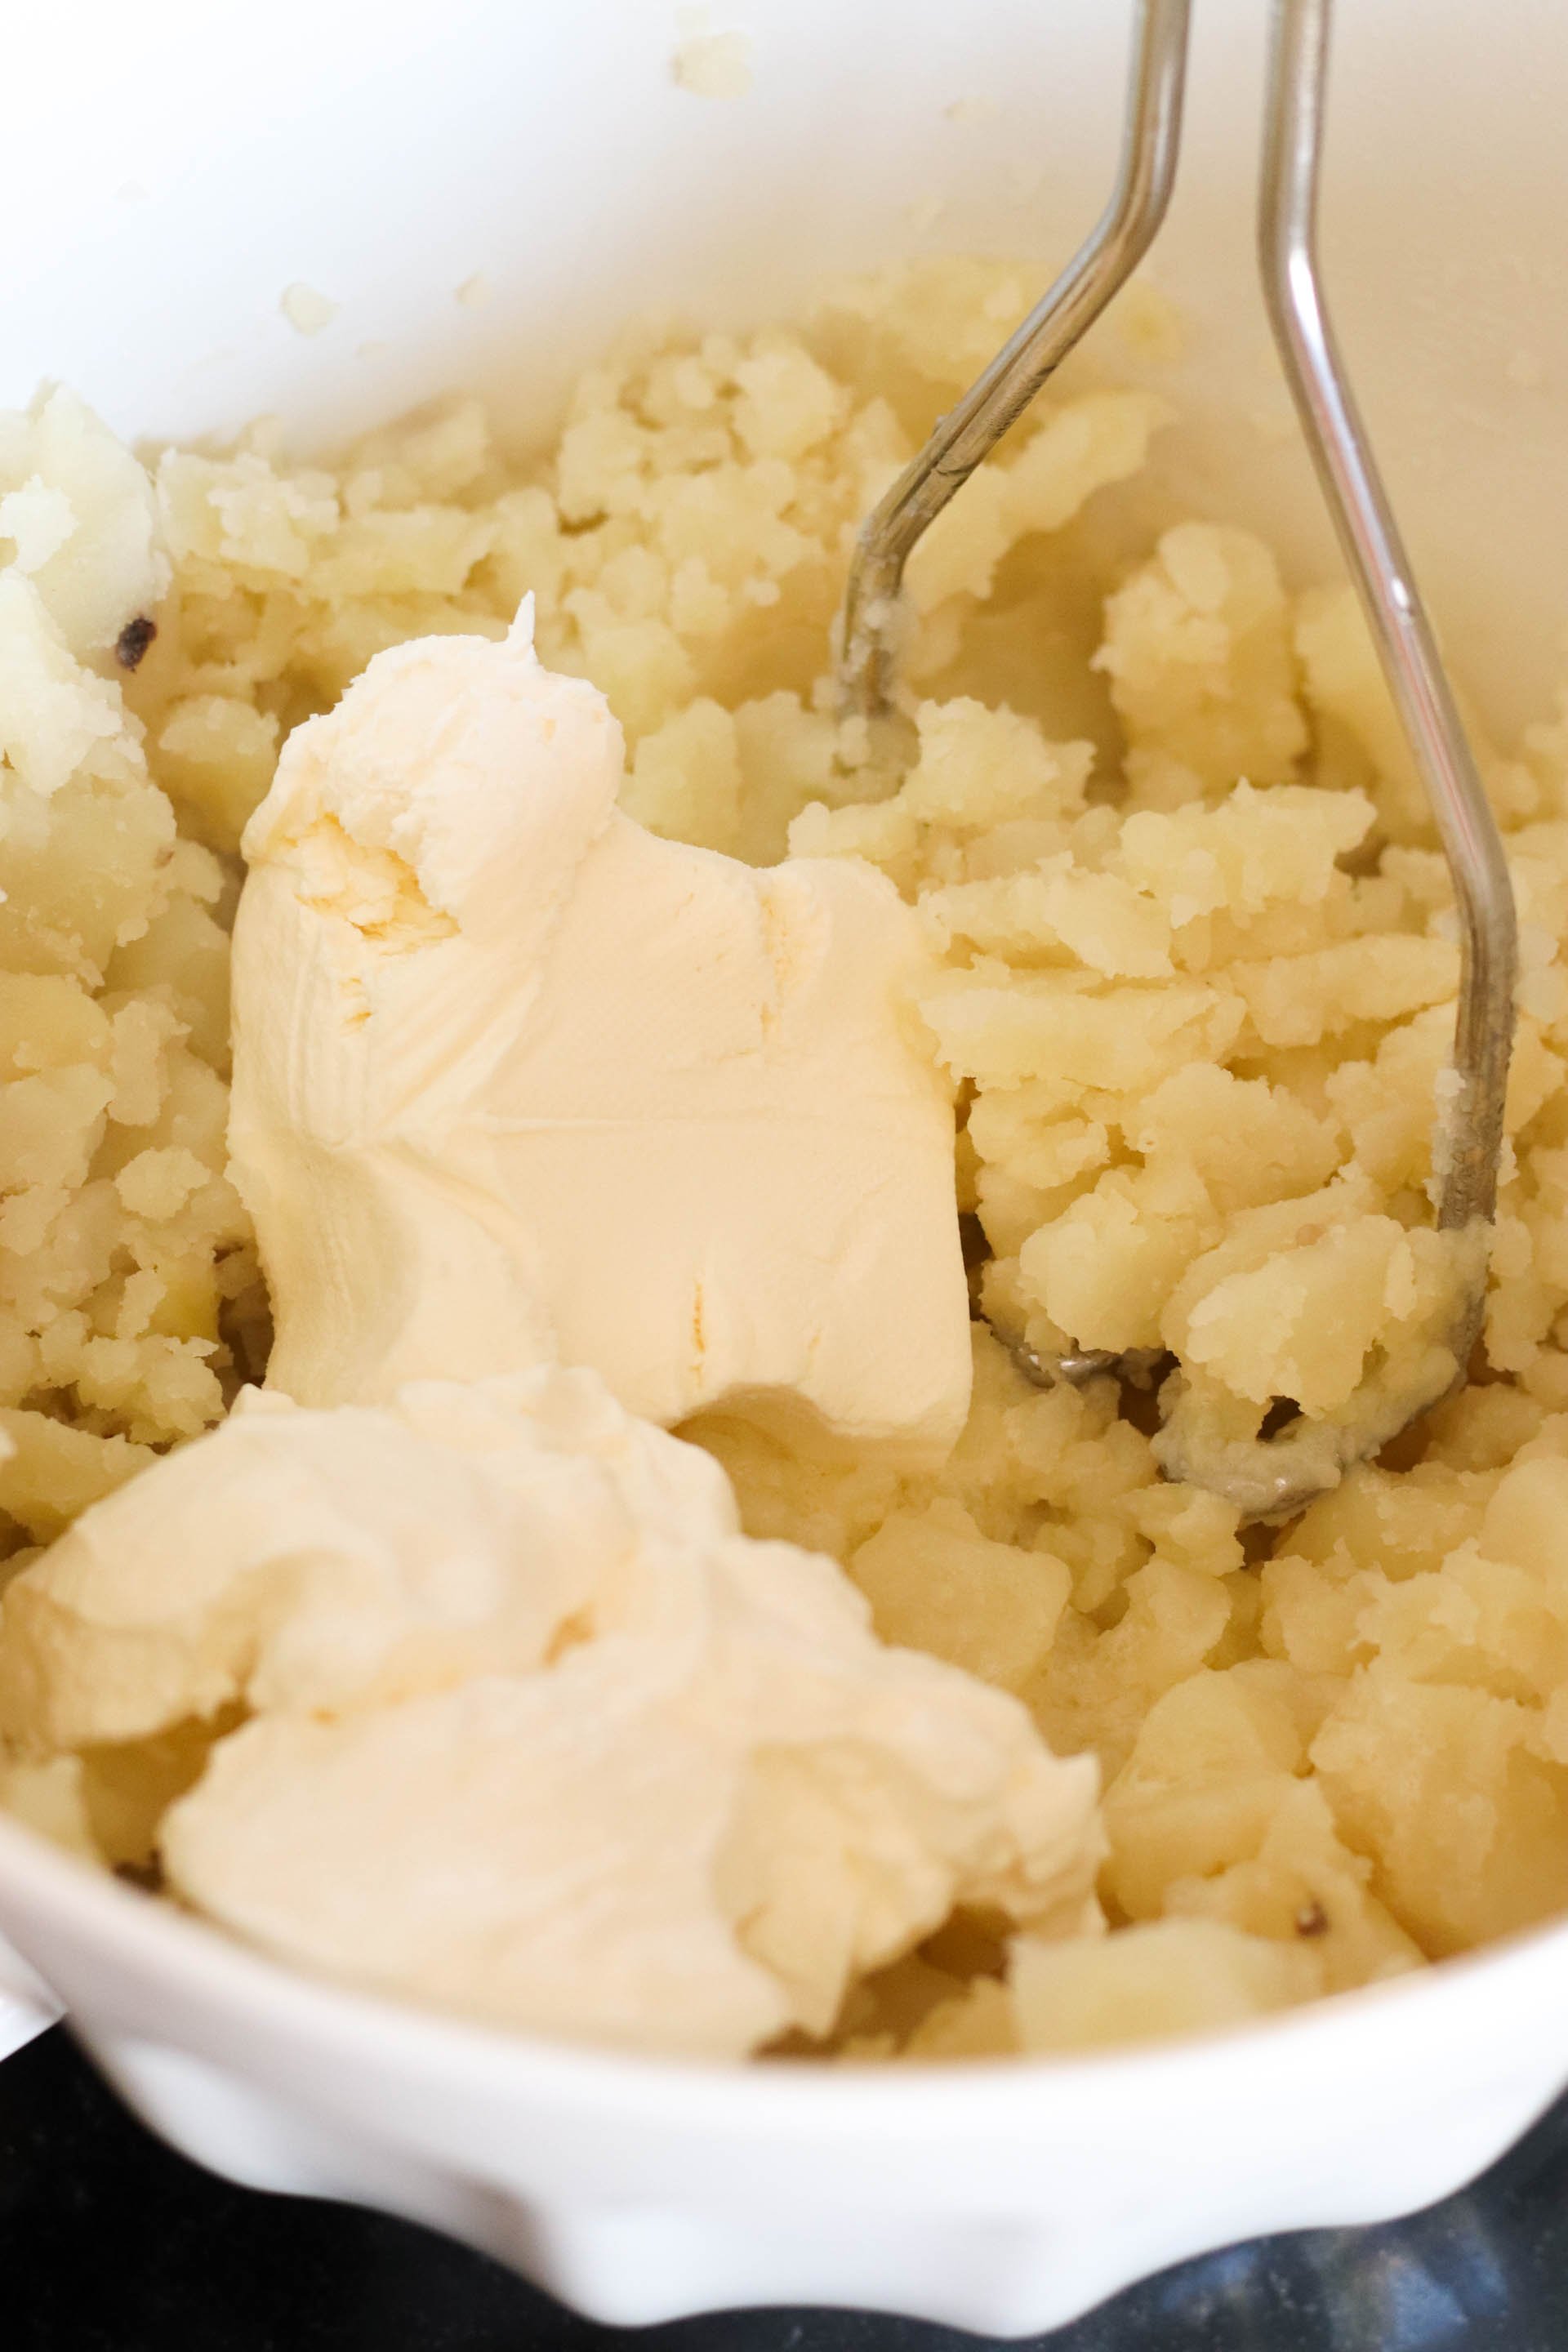 Potatoes, sour cream, and cream cheese being mixed together with a potato masher